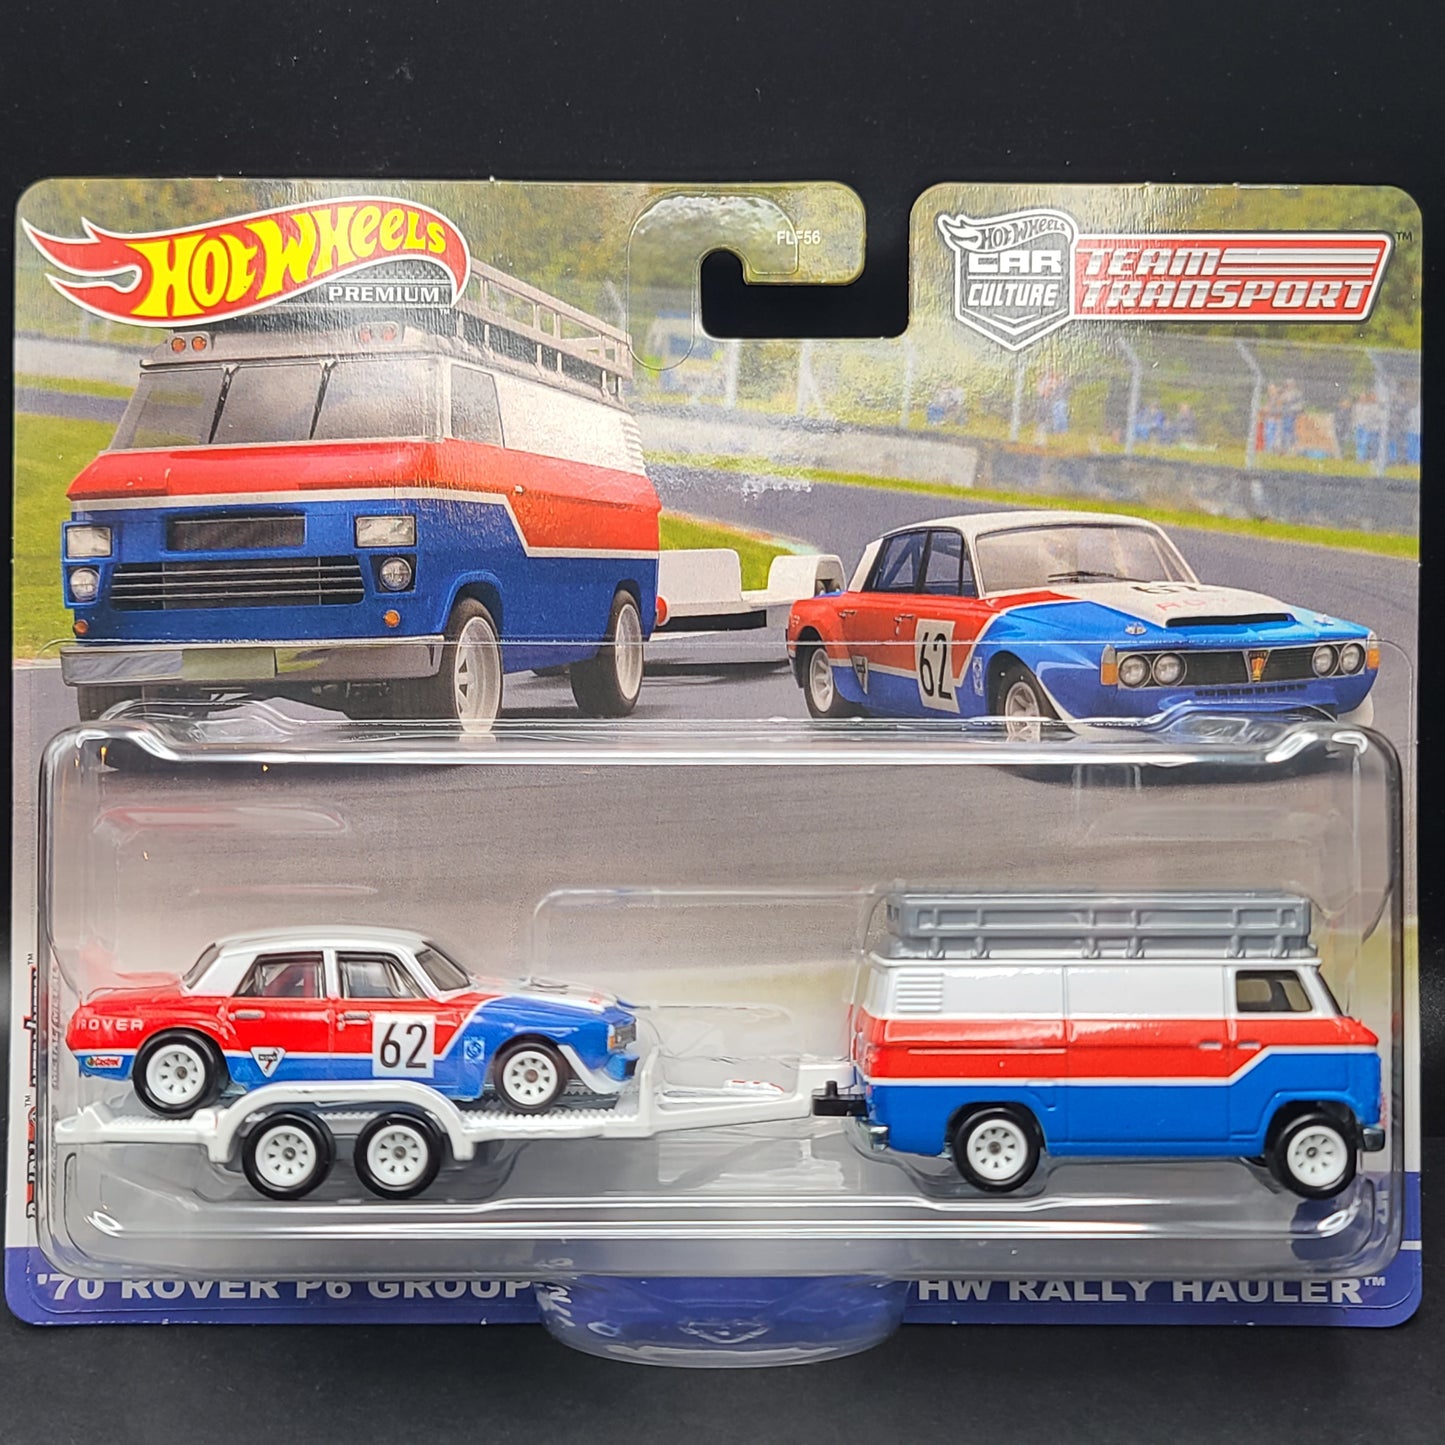 Hot Wheels Team Transport Hw Rally Hauler And 70 Rover P6 Group 2 20 Heavy Metal Diecast 5839